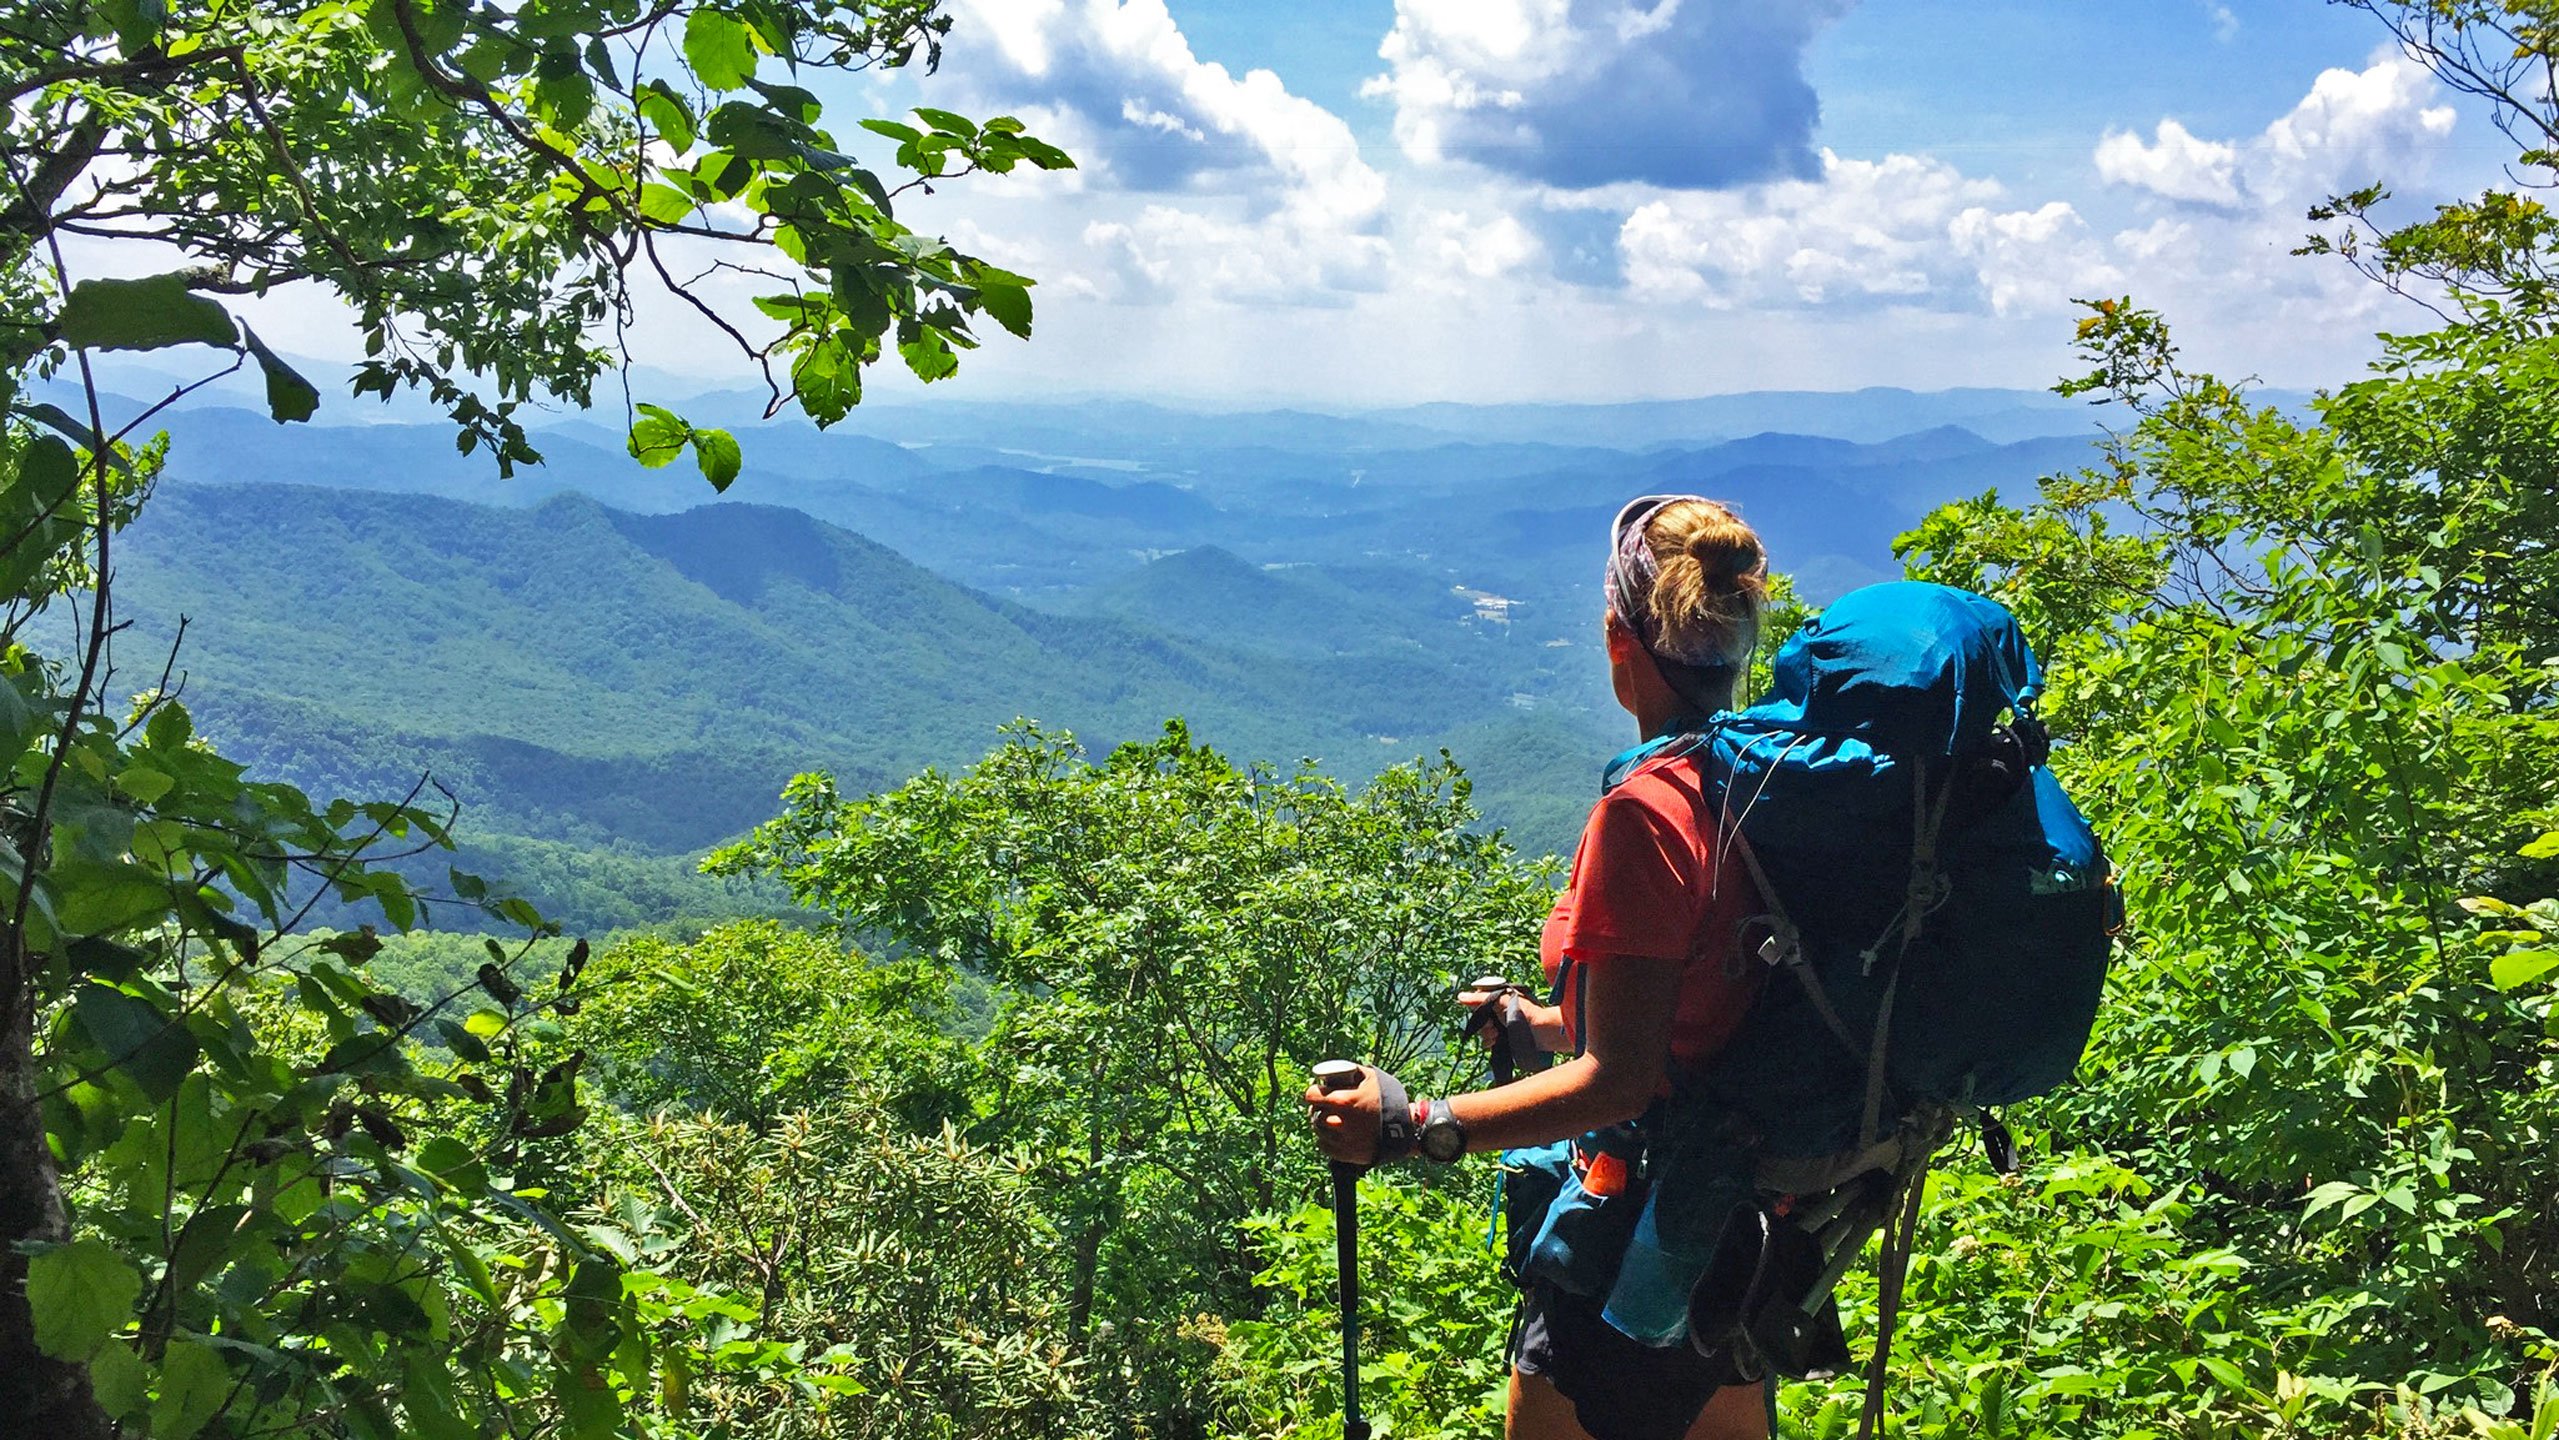 Getting ready for an A.T. adventure? This collection of resources will help you stay safe, healthy, and responsible on the Appalachian Trail.